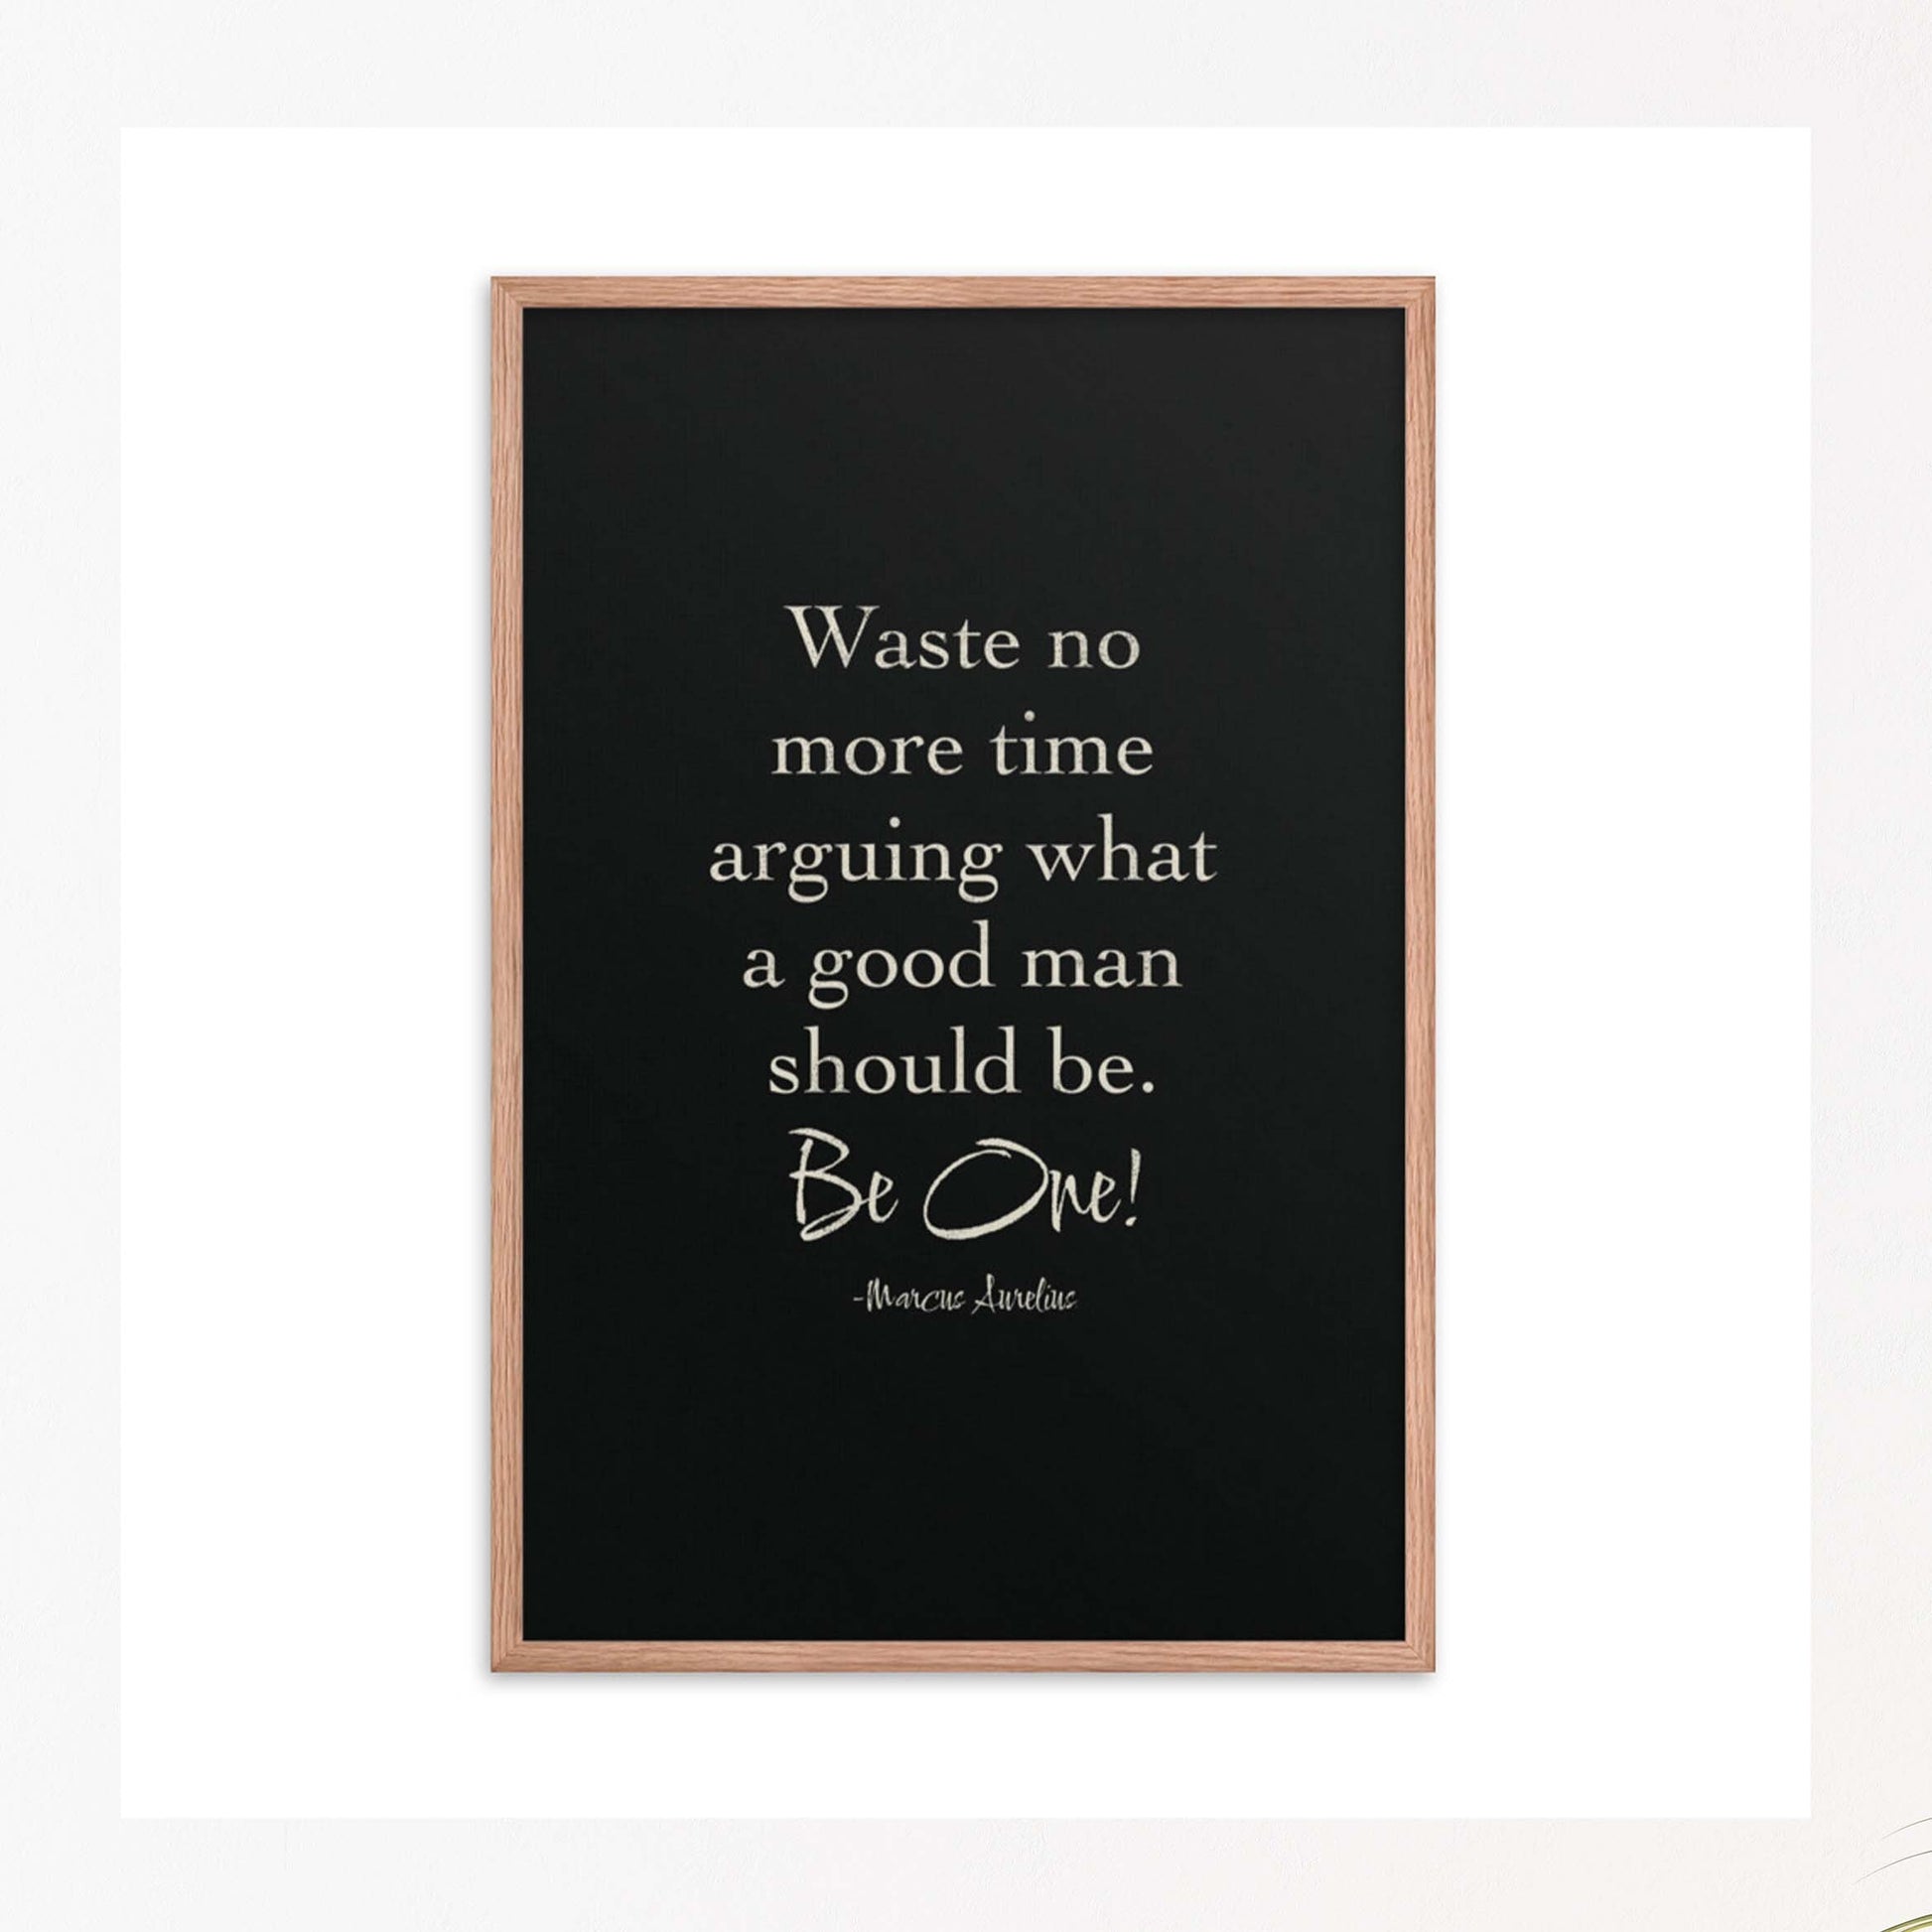 Waste no more time arguing what a good man should be.Be One! by Marcus Aurelius white on Black background red oak framed poster.